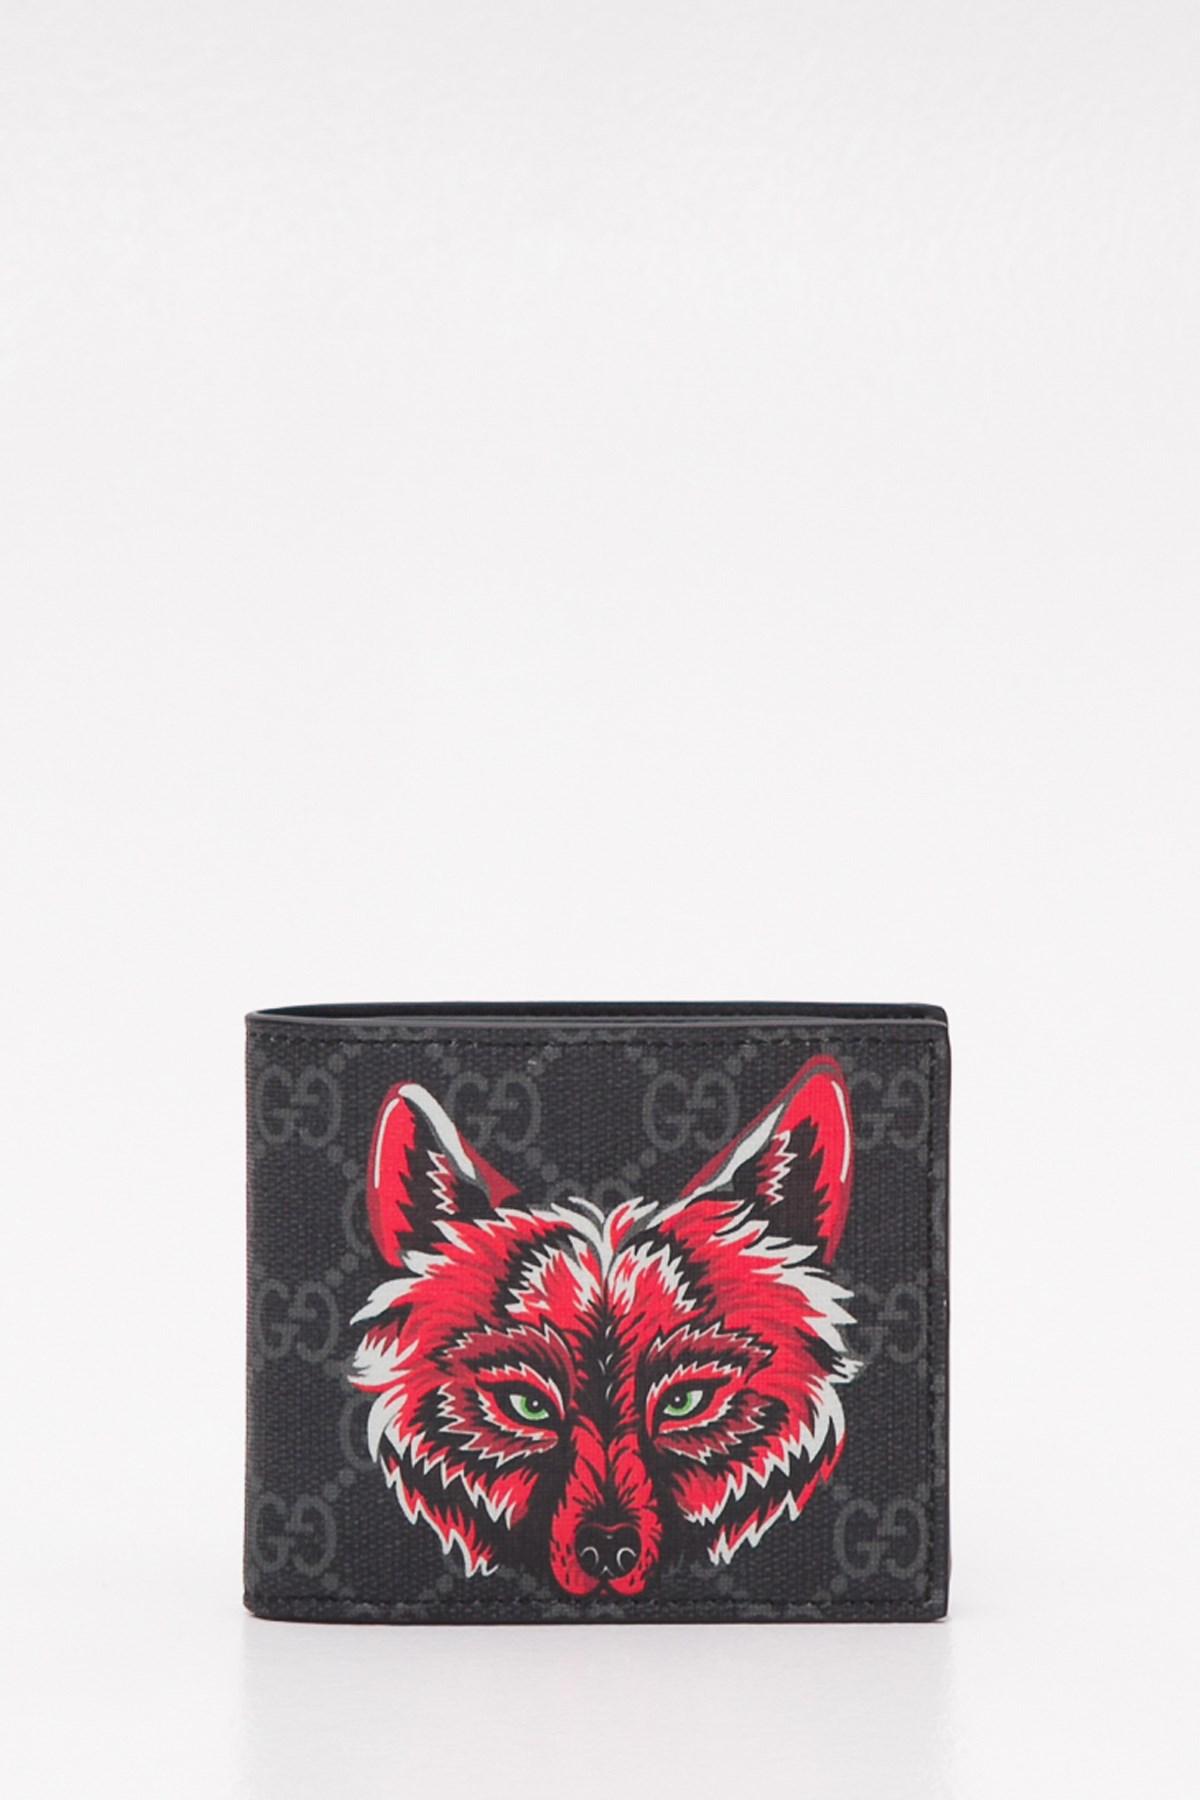 Gucci Canvas Gg Supreme Wallet With Wolf for Men - Lyst